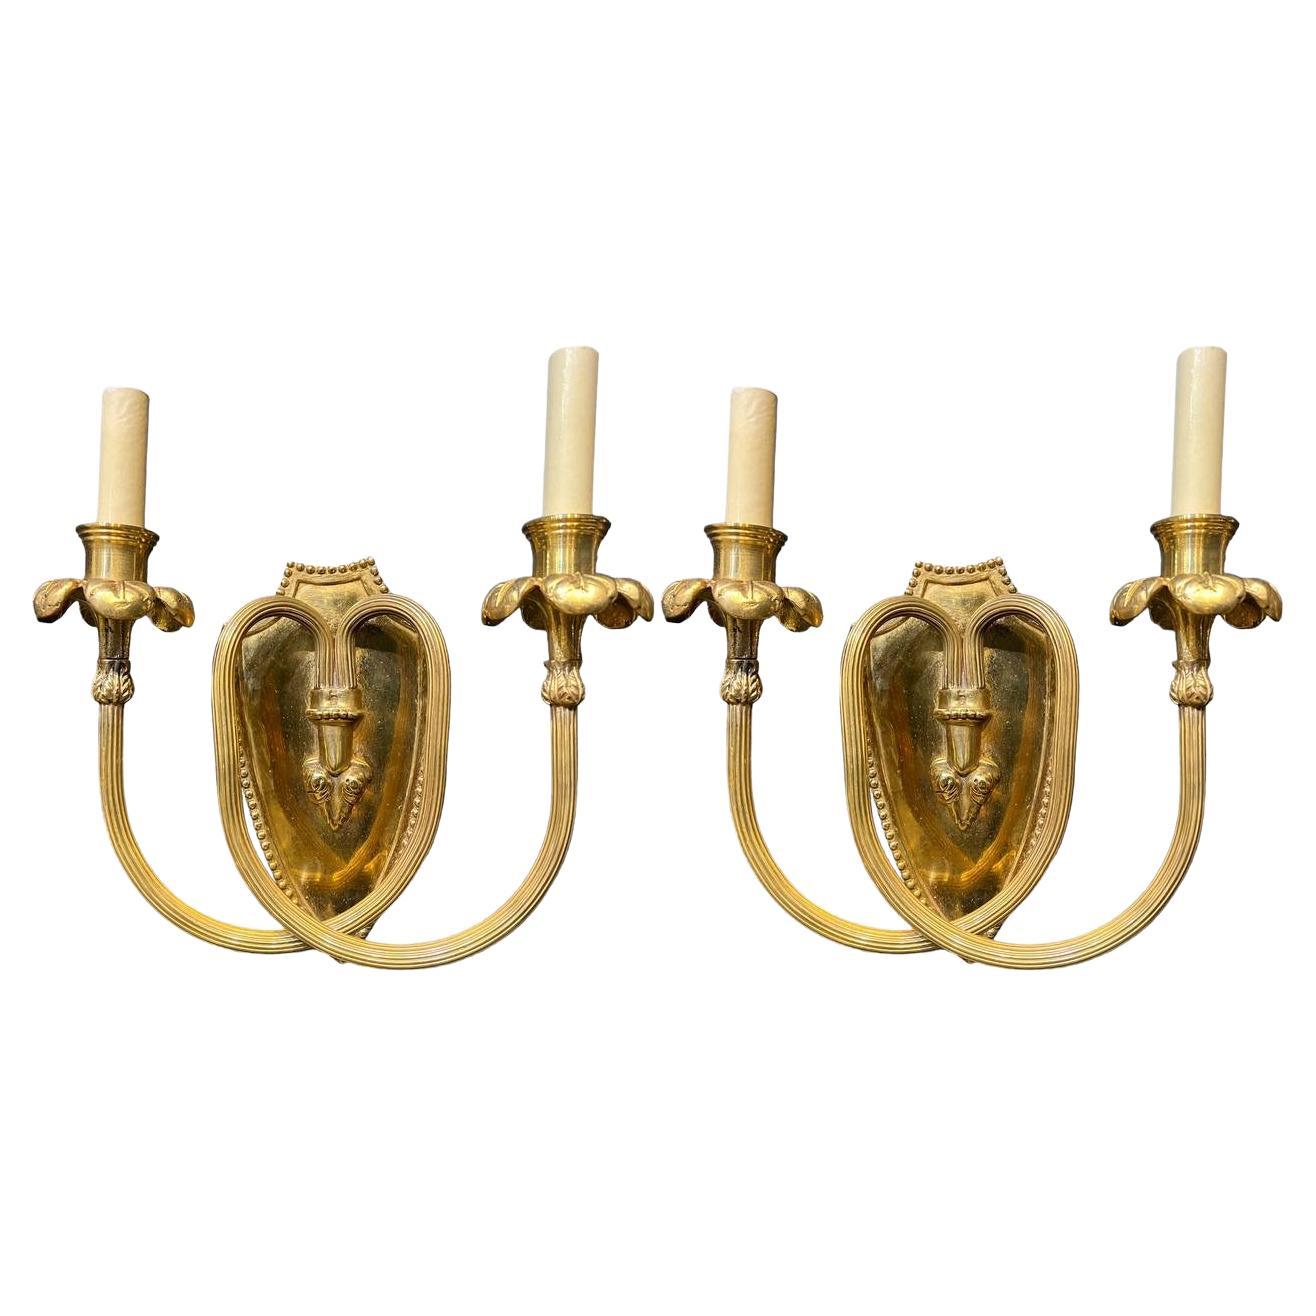 1920’s Caldwell Bronze Sconces with Scrolled Arms For Sale